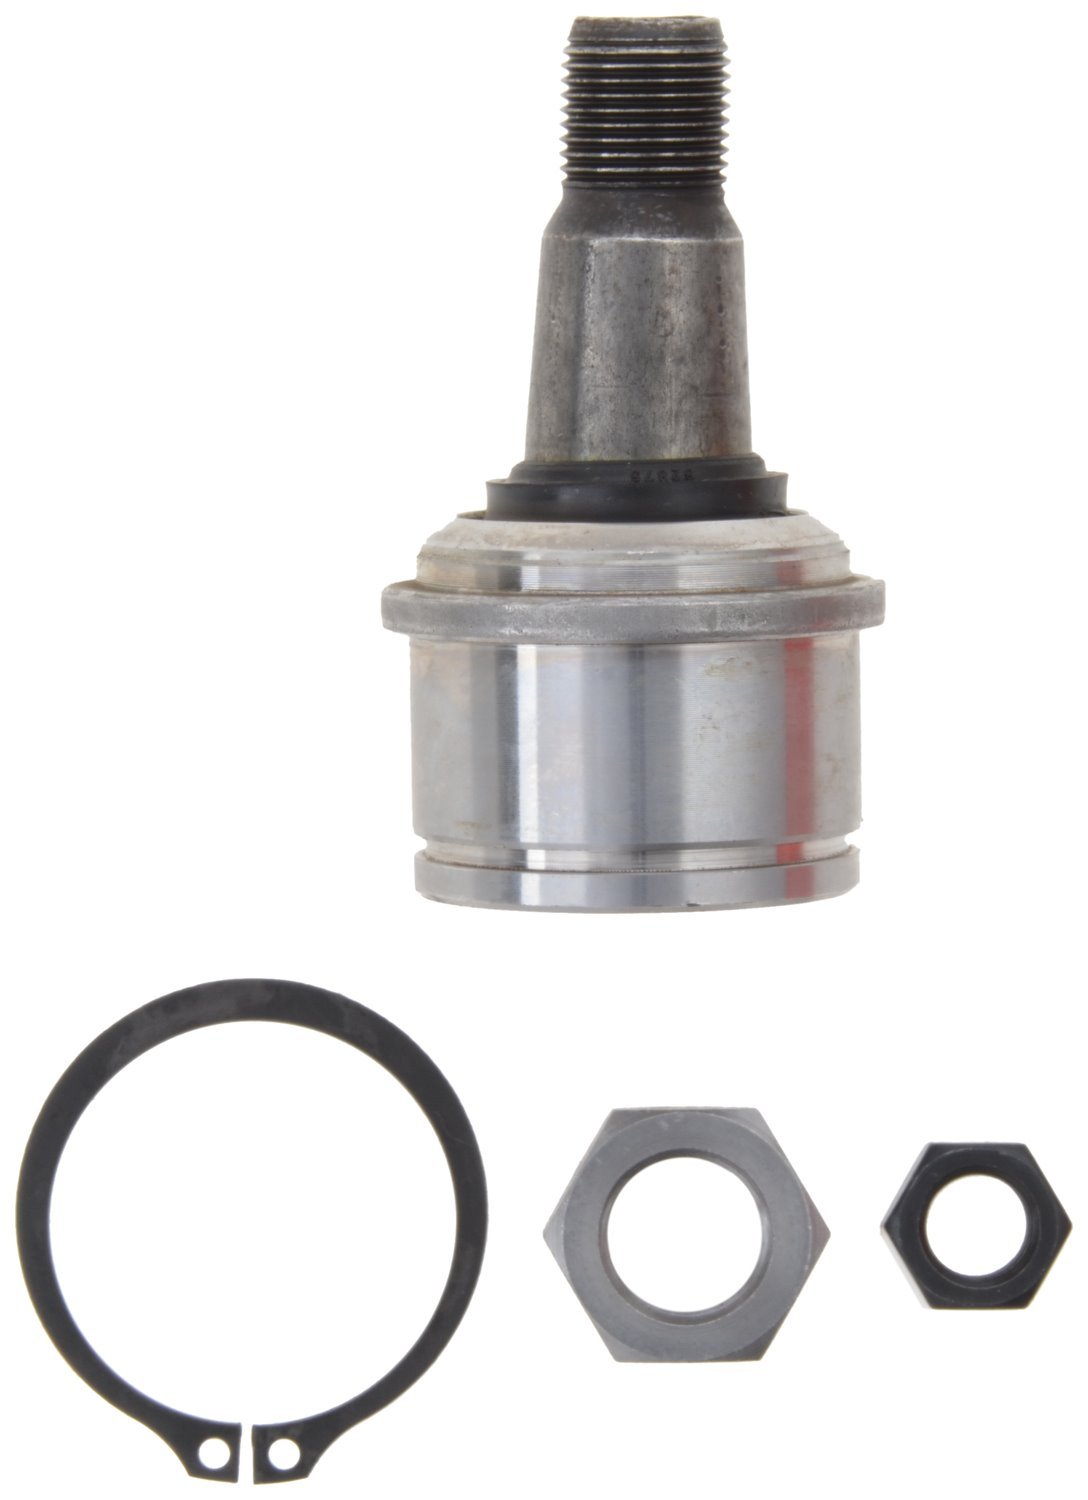 JBJ7010 Ball Joint Fits Select Ford Models, Position: Left/Driver or Right/Passenger, Front Lower